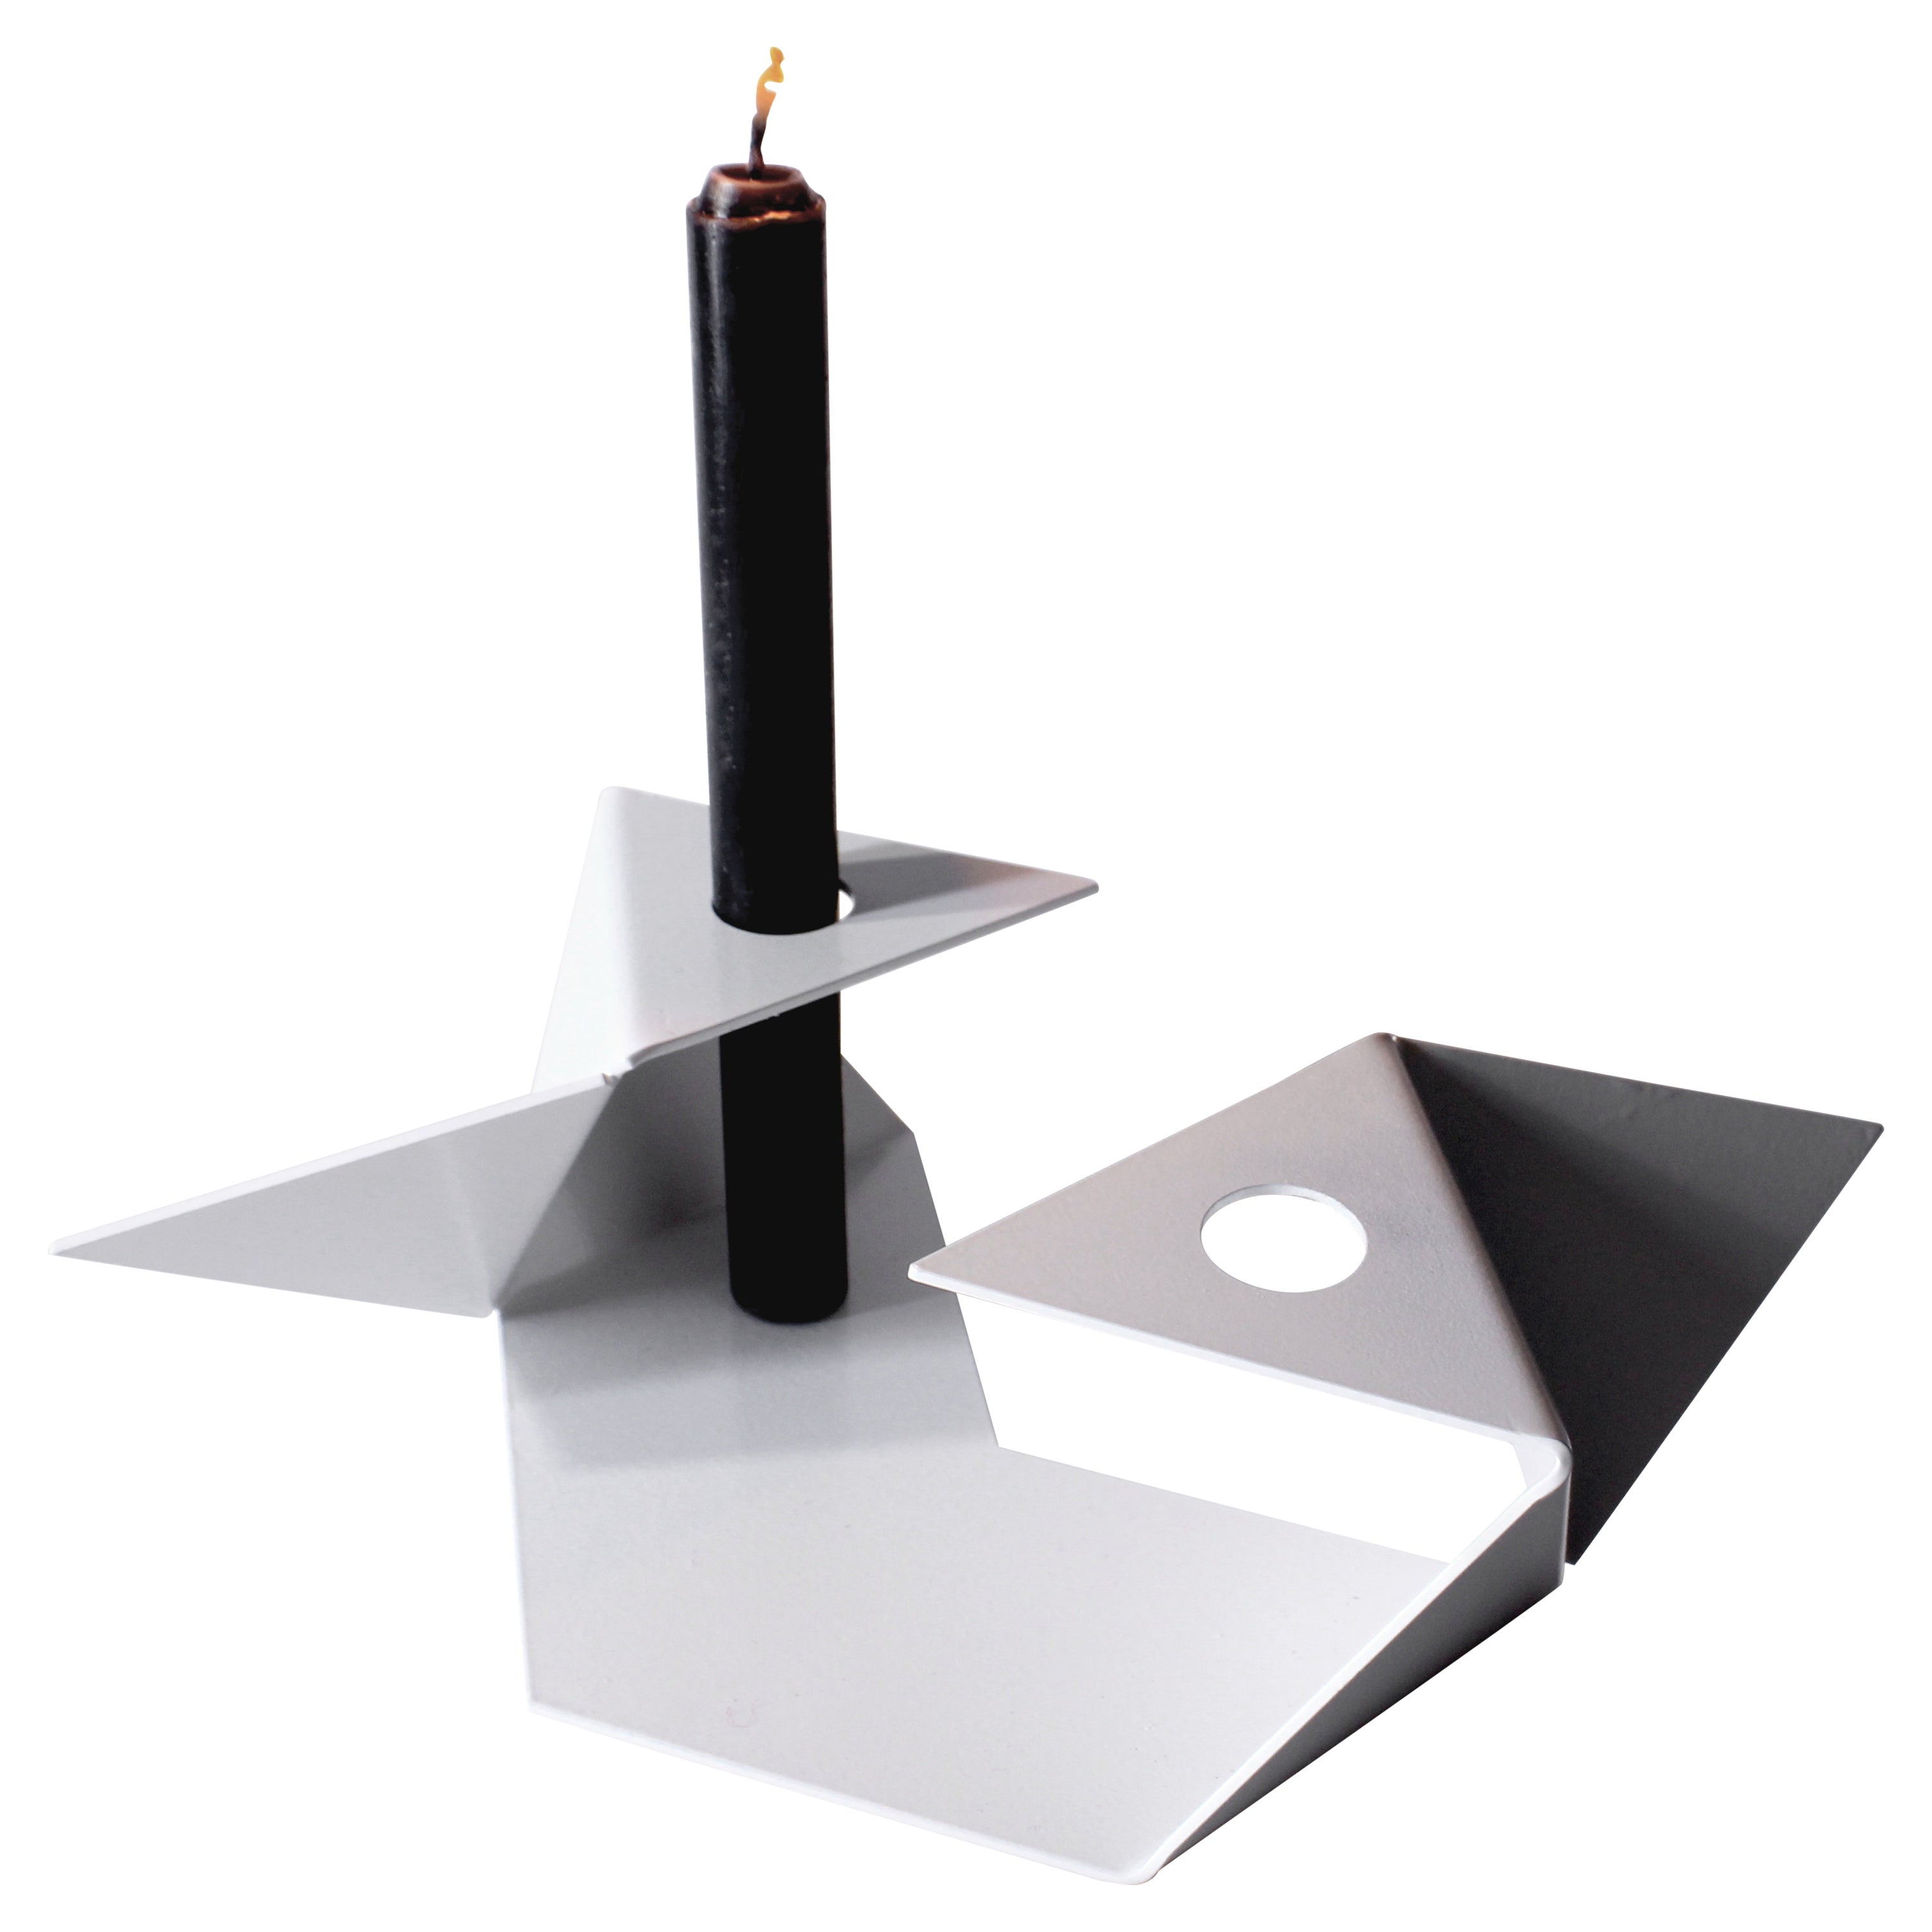 White Platonic candleholder (two candles) by Gabriel Freitas